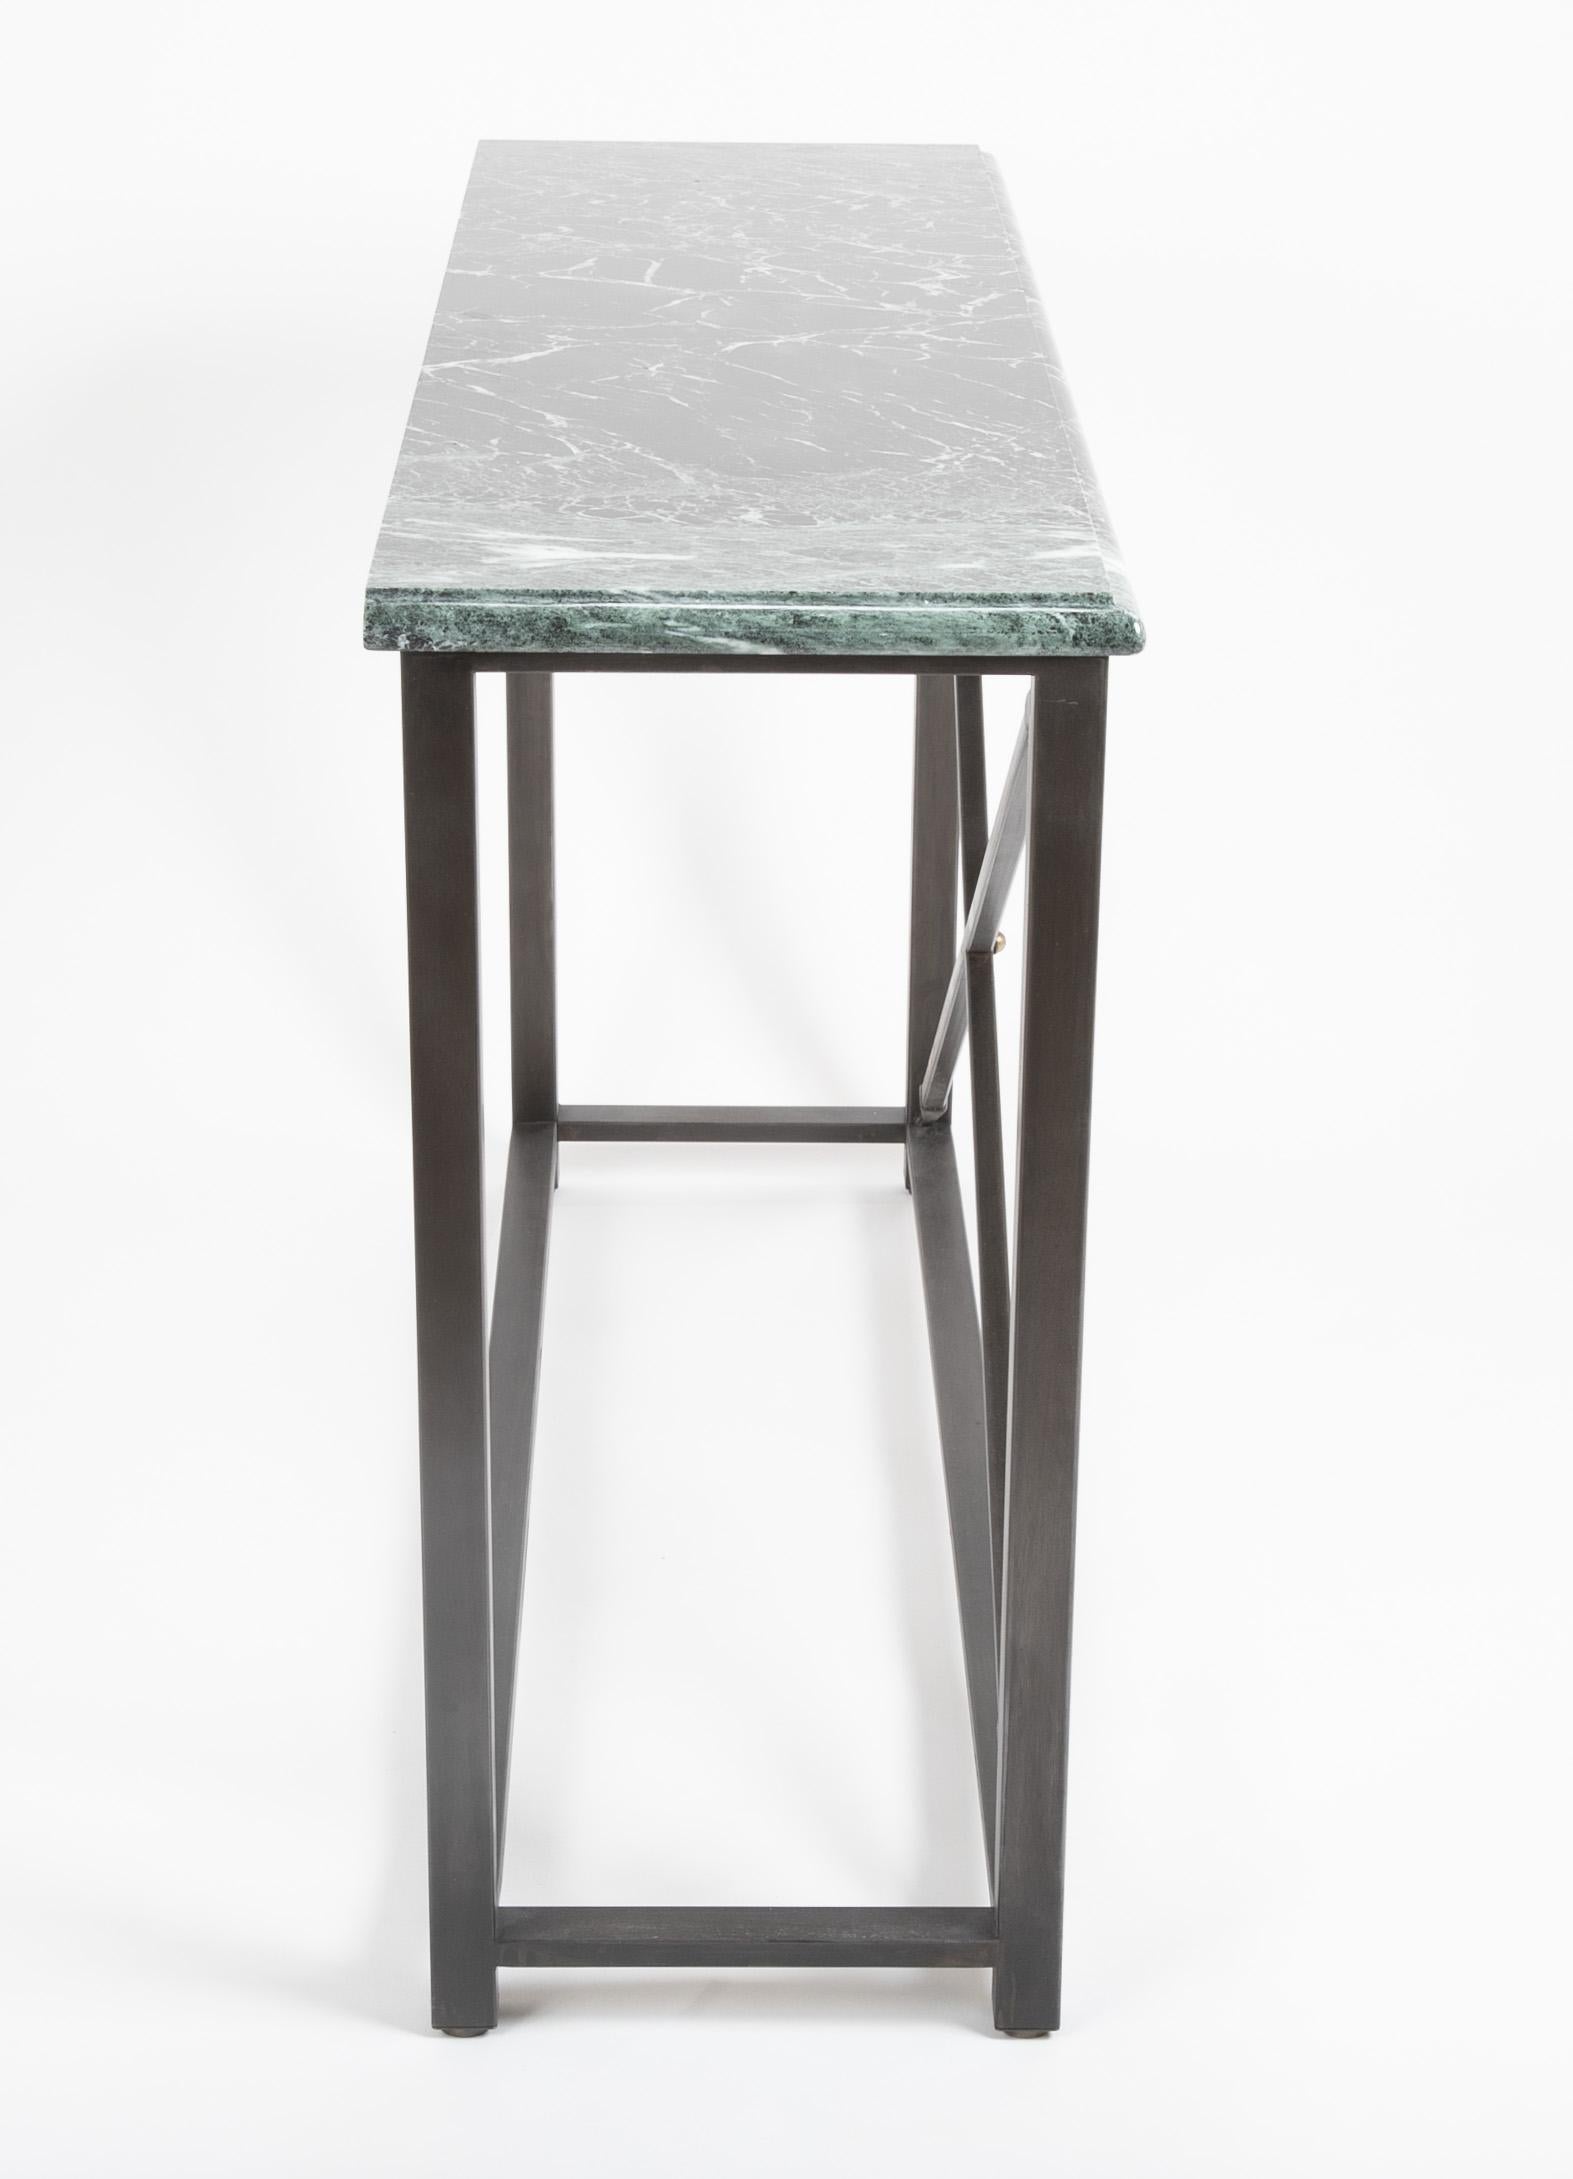 Pair of Neoclassical Style Steel Console Tables with Green Marble Tops For Sale 10